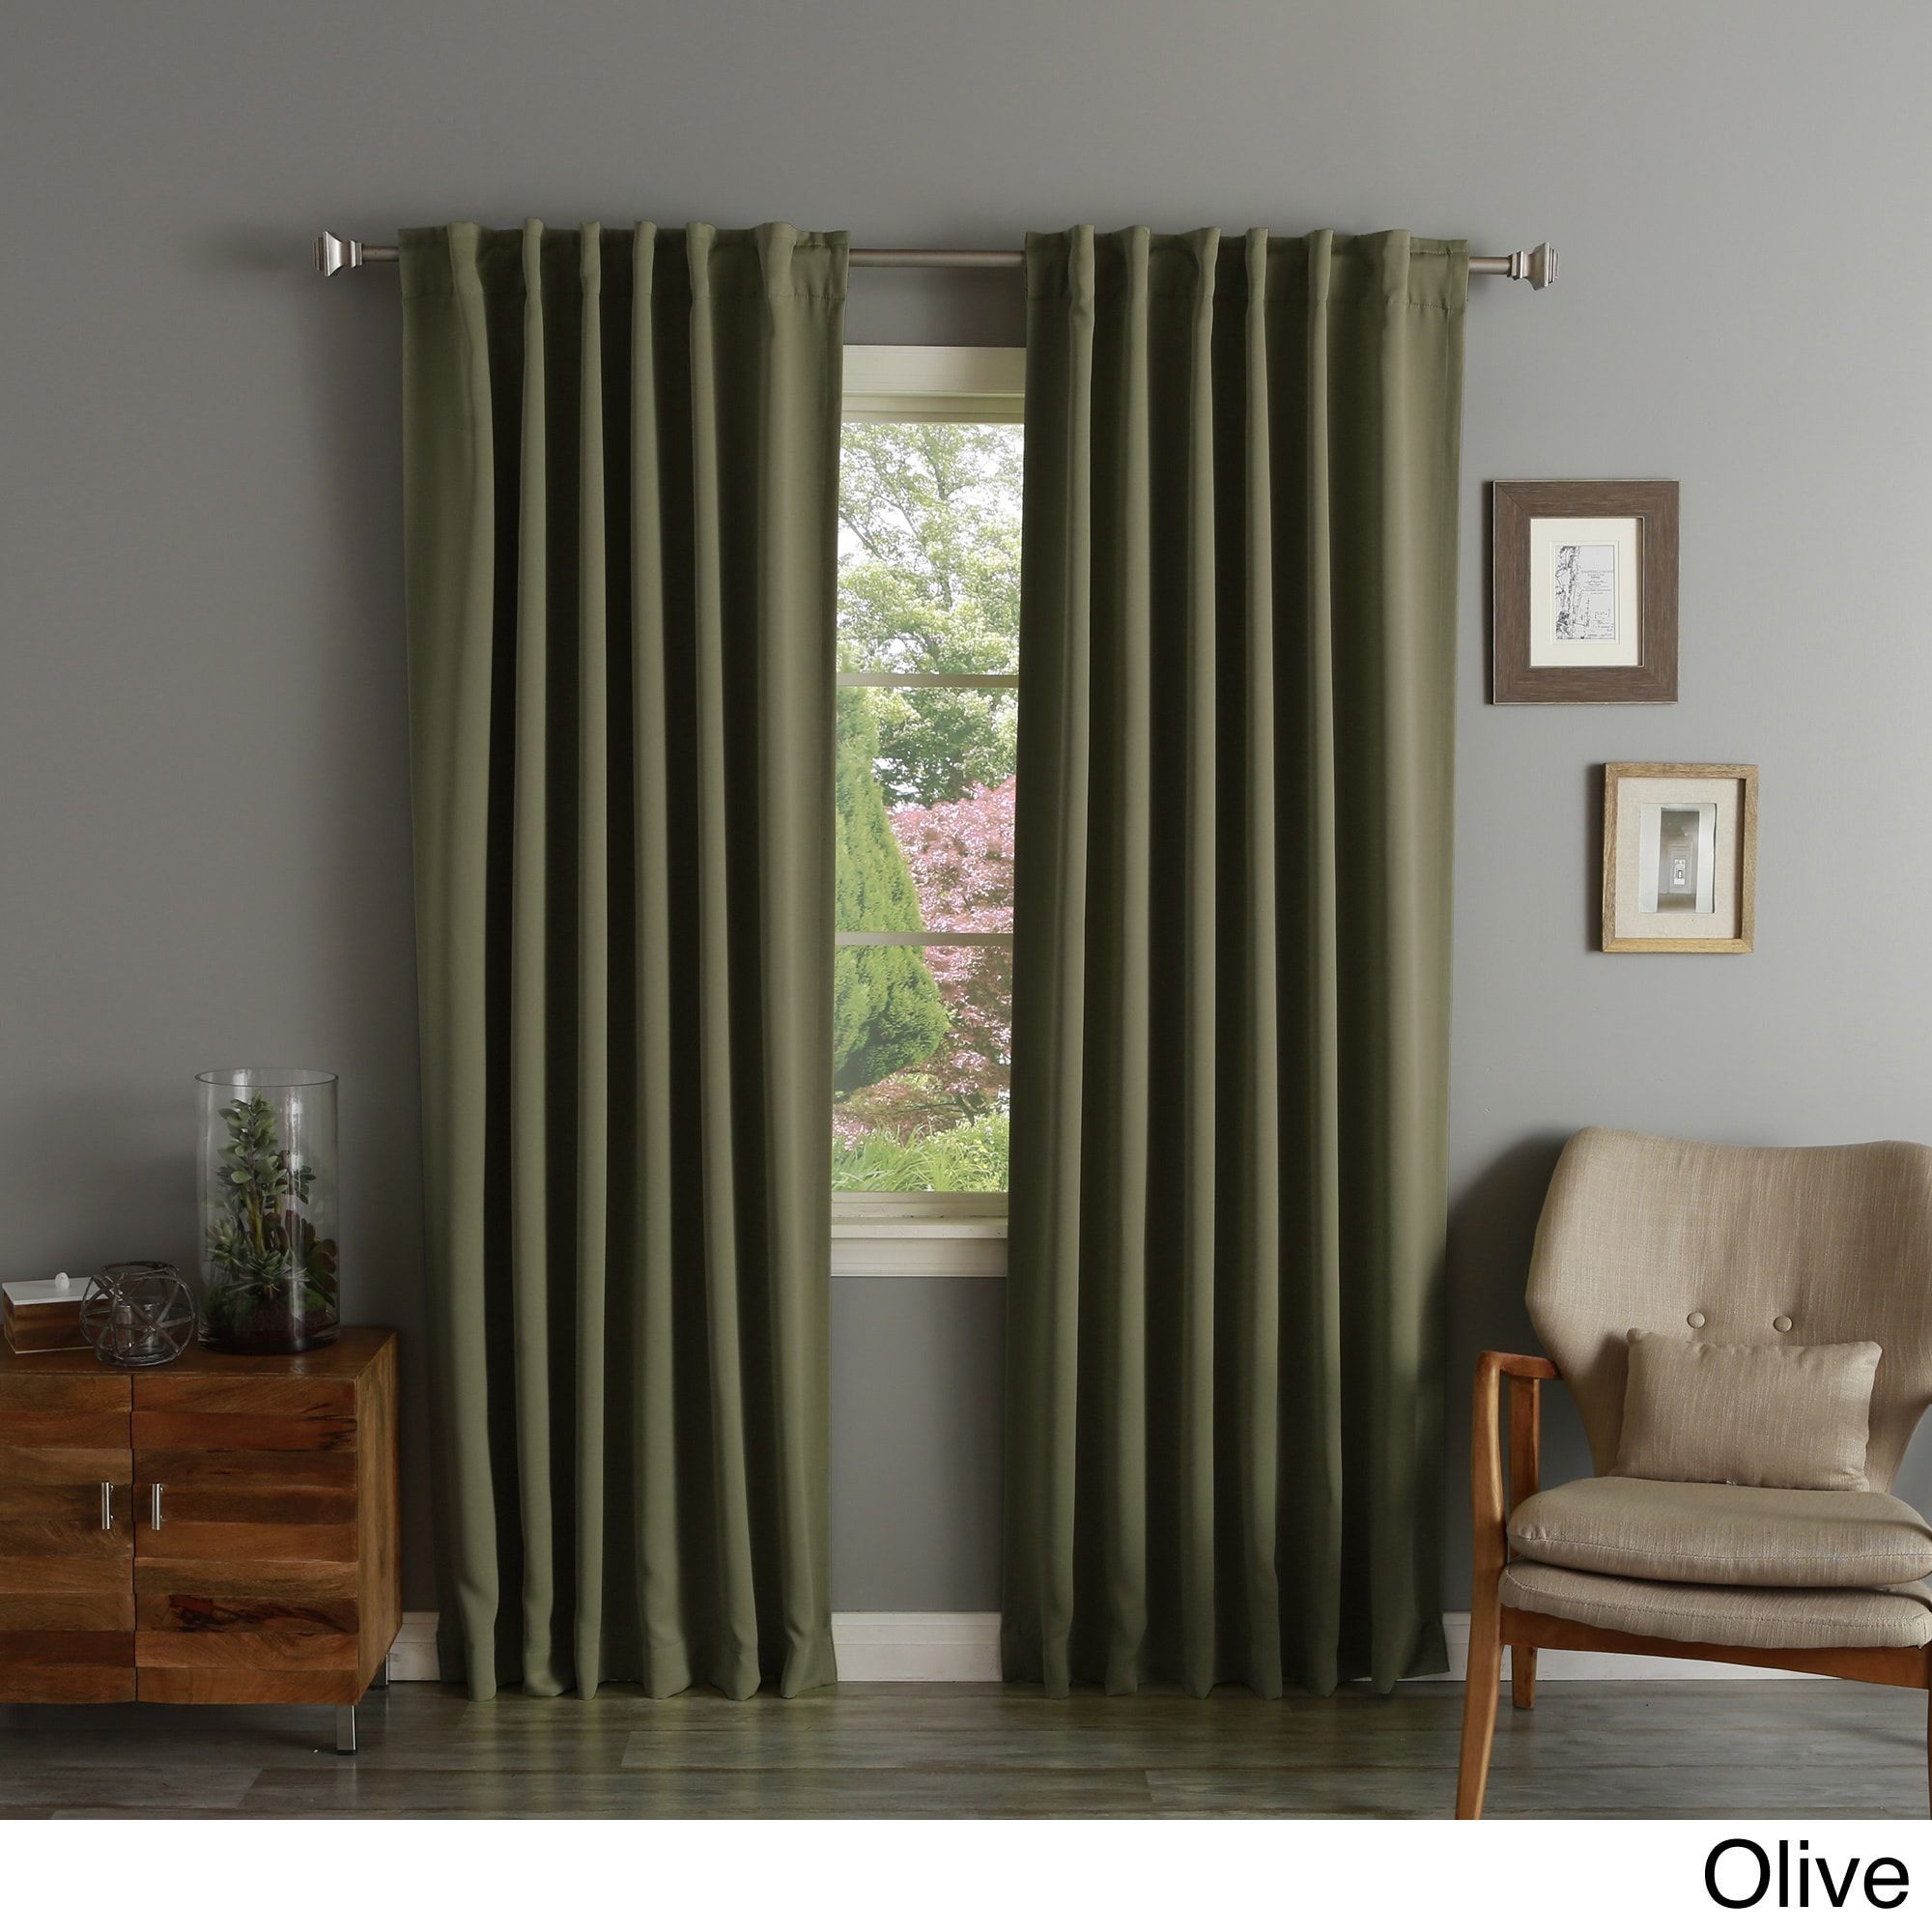 Aurora Home Solid Insulated Thermal Blackout Long Length In Solid Insulated Thermal Blackout Long Length Curtain Panel Pairs (View 4 of 30)